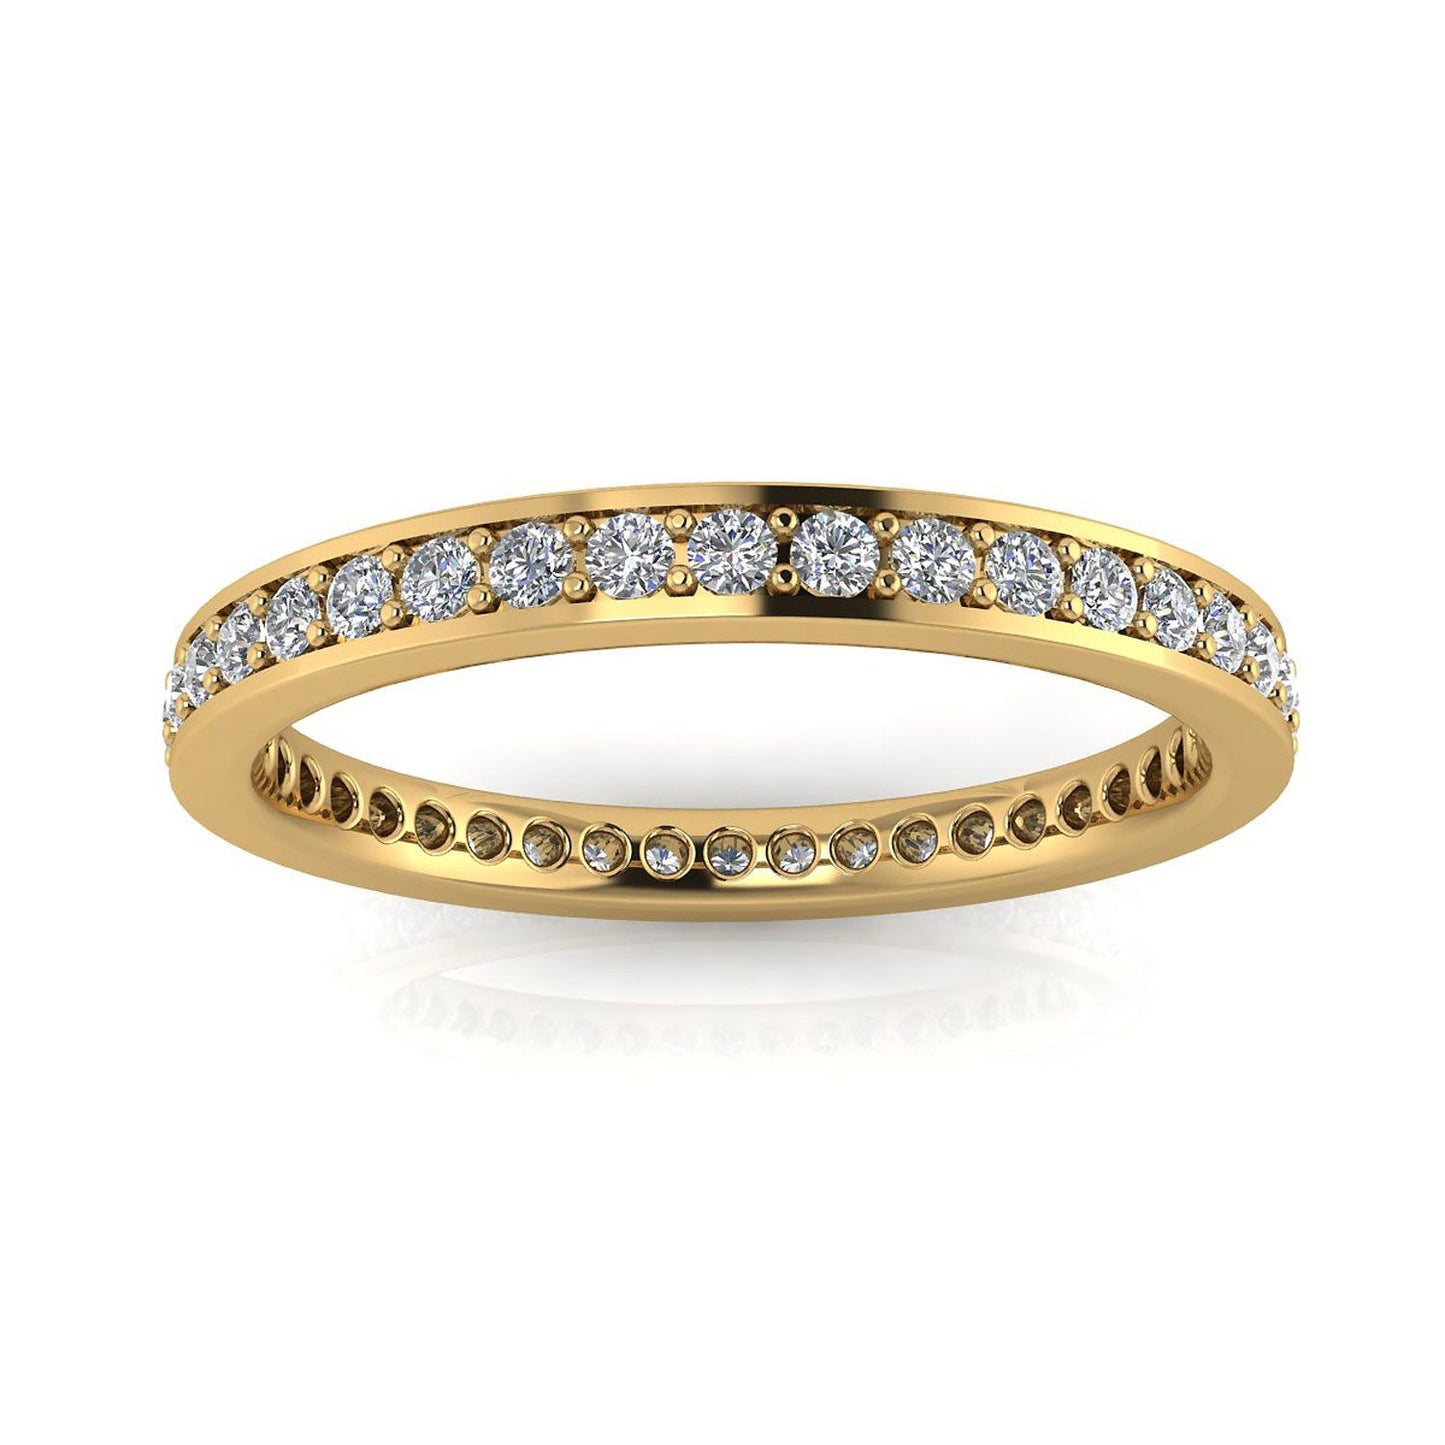 Round Brilliant Cut Diamond Channel Pave Set Eternity Ring In 18k Yellow Gold  (0.7ct. Tw.) Ring Size 6.5